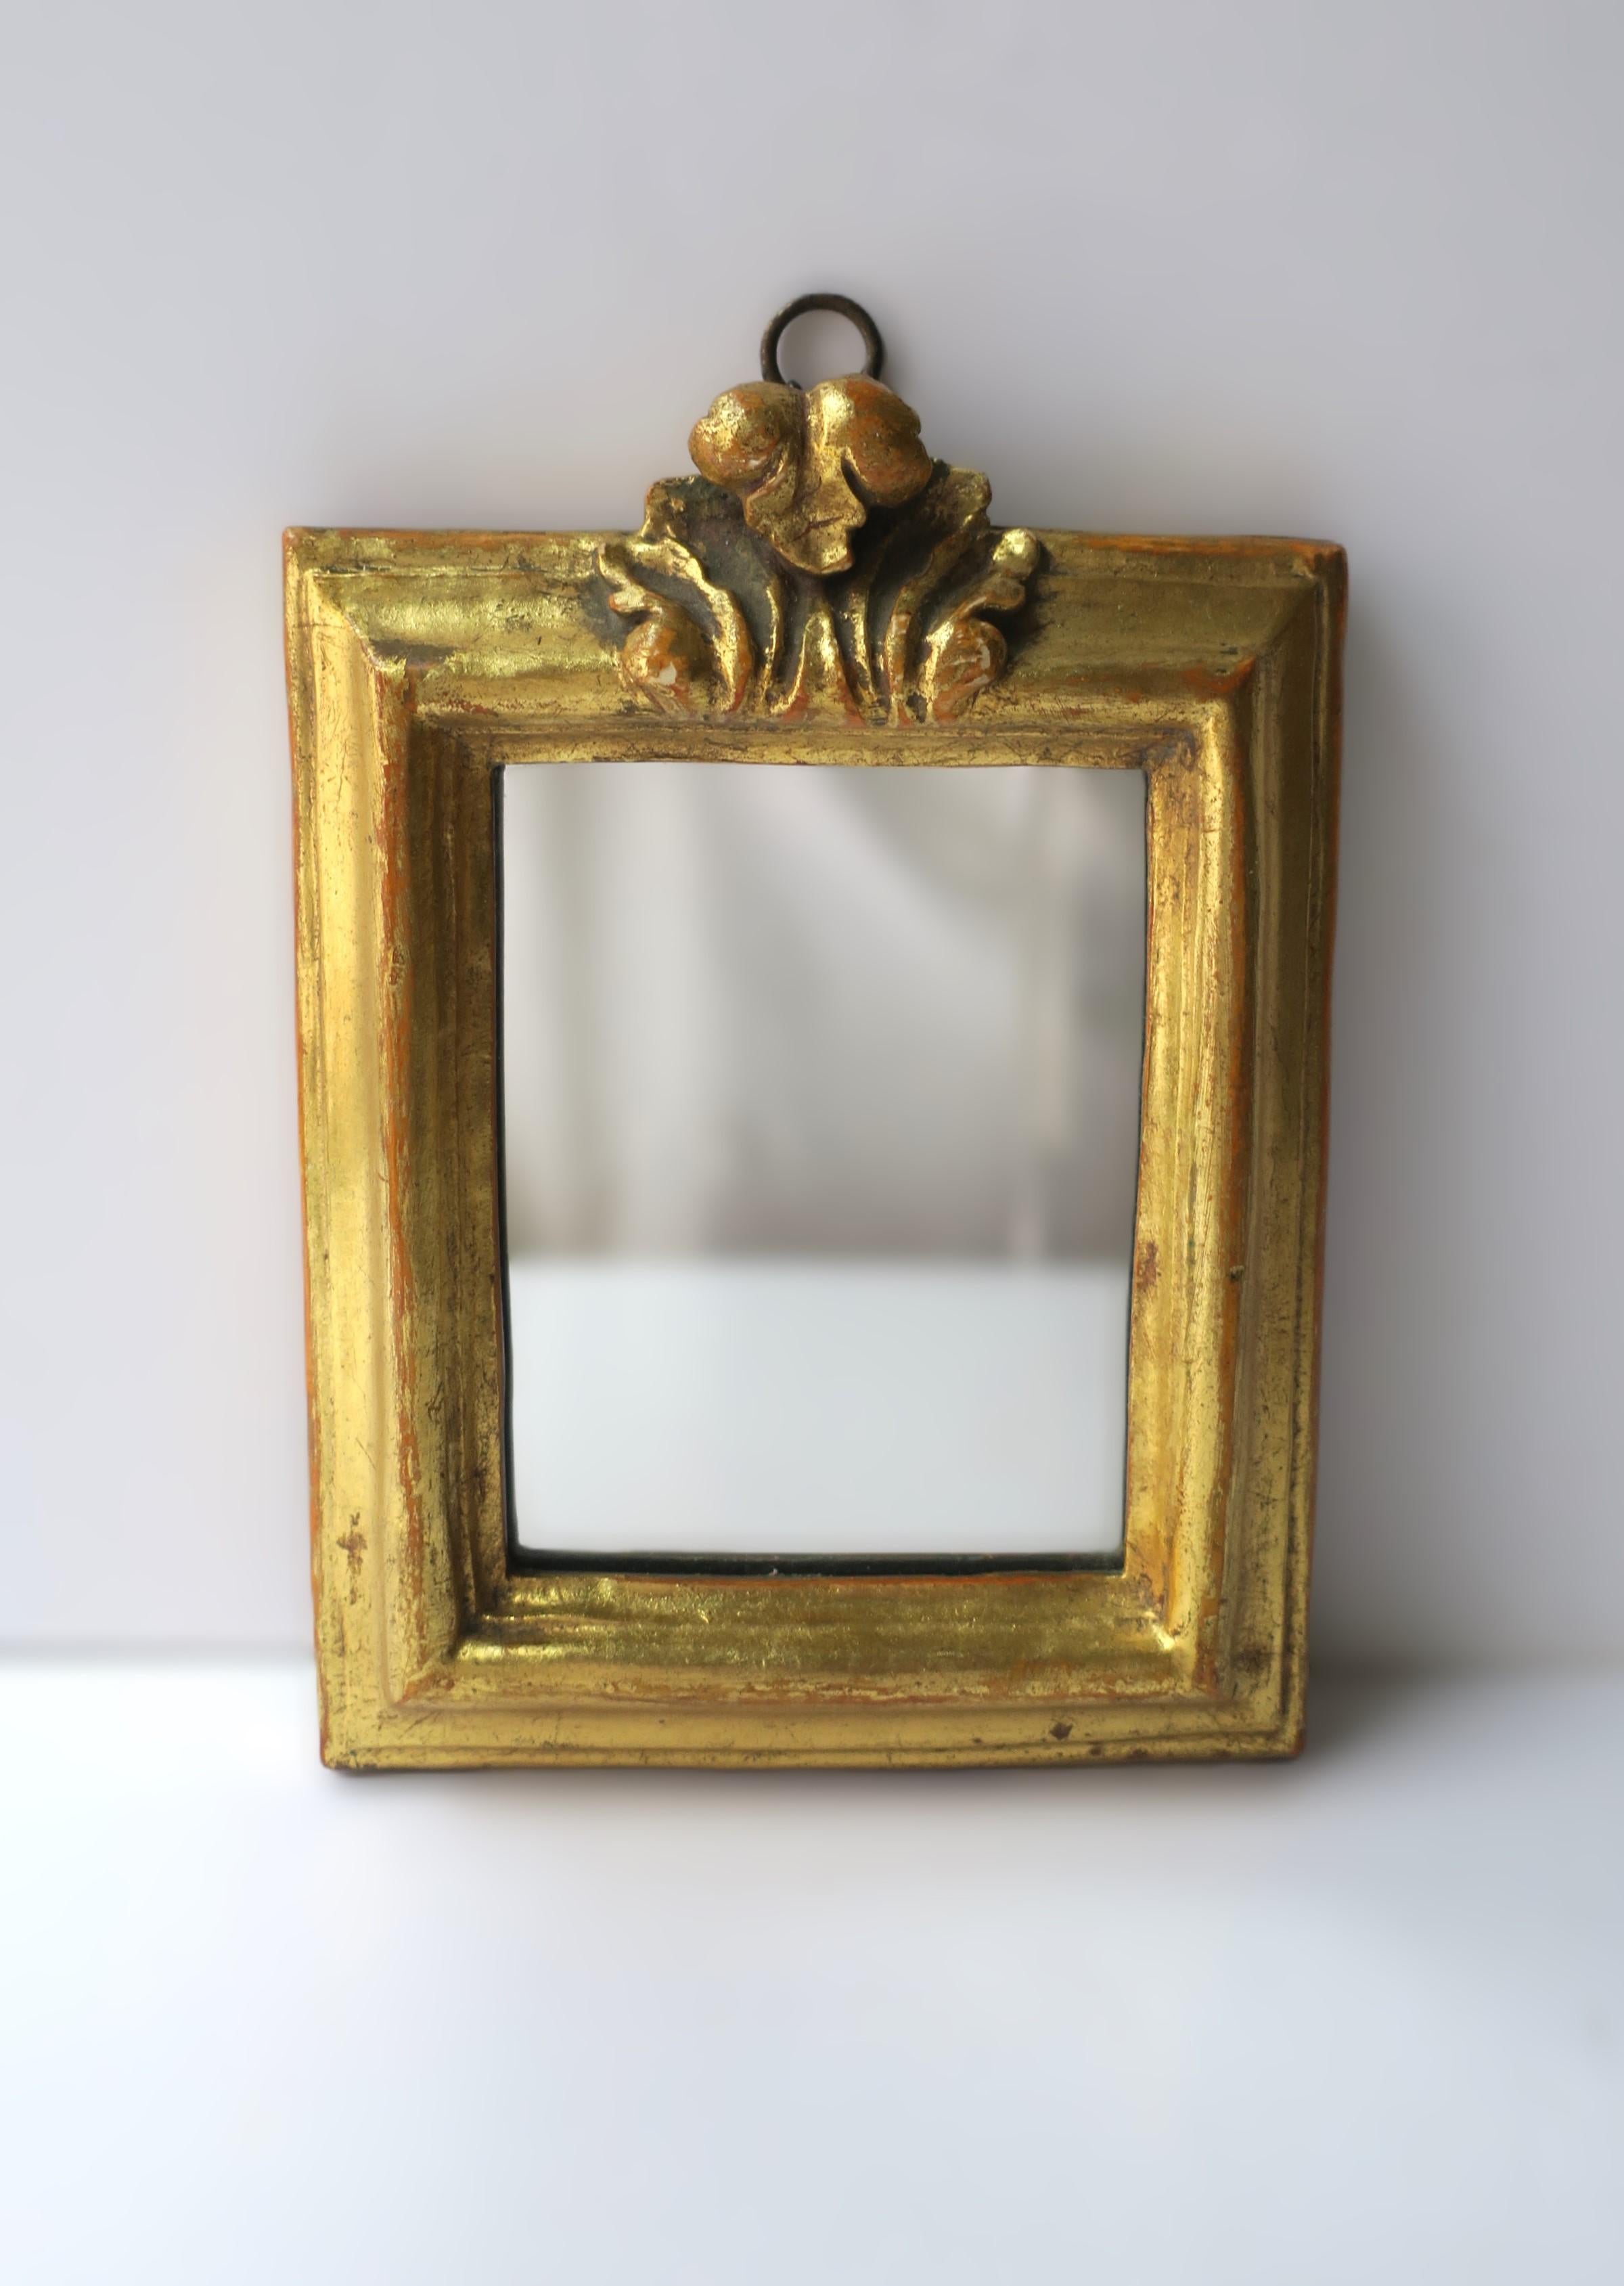 A small well-made Italian gold giltwood wall accent mirror, with acanthus leaf design, by Borghese, as marked, circa early to mid-20th century, Italy. Mirror is prepared for hanging with brass loop at top, as shown. Mirror frames face perfectly.